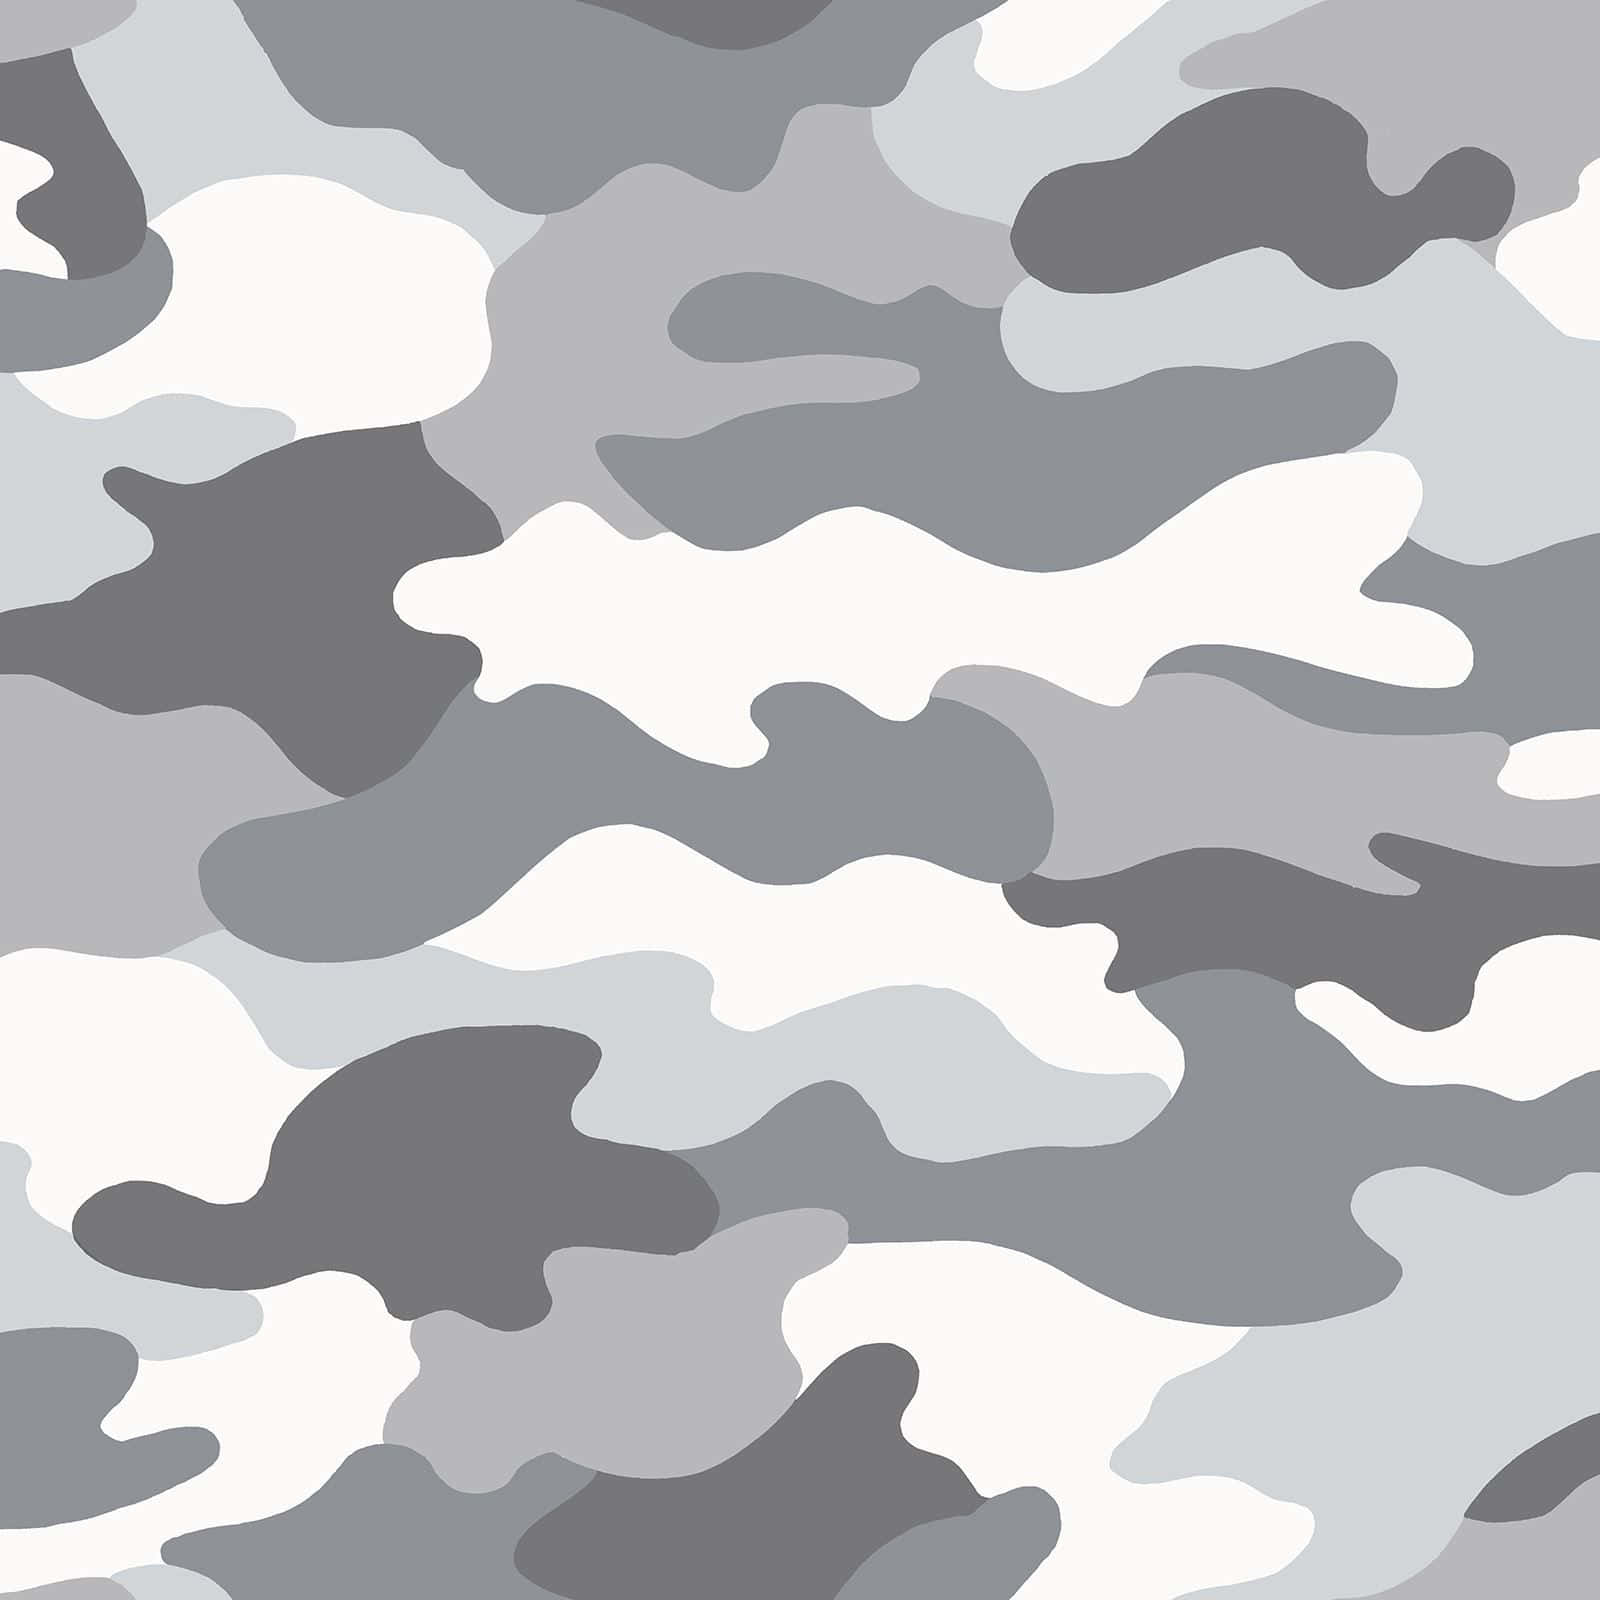 Chucoco Gray Military Camouflage Background